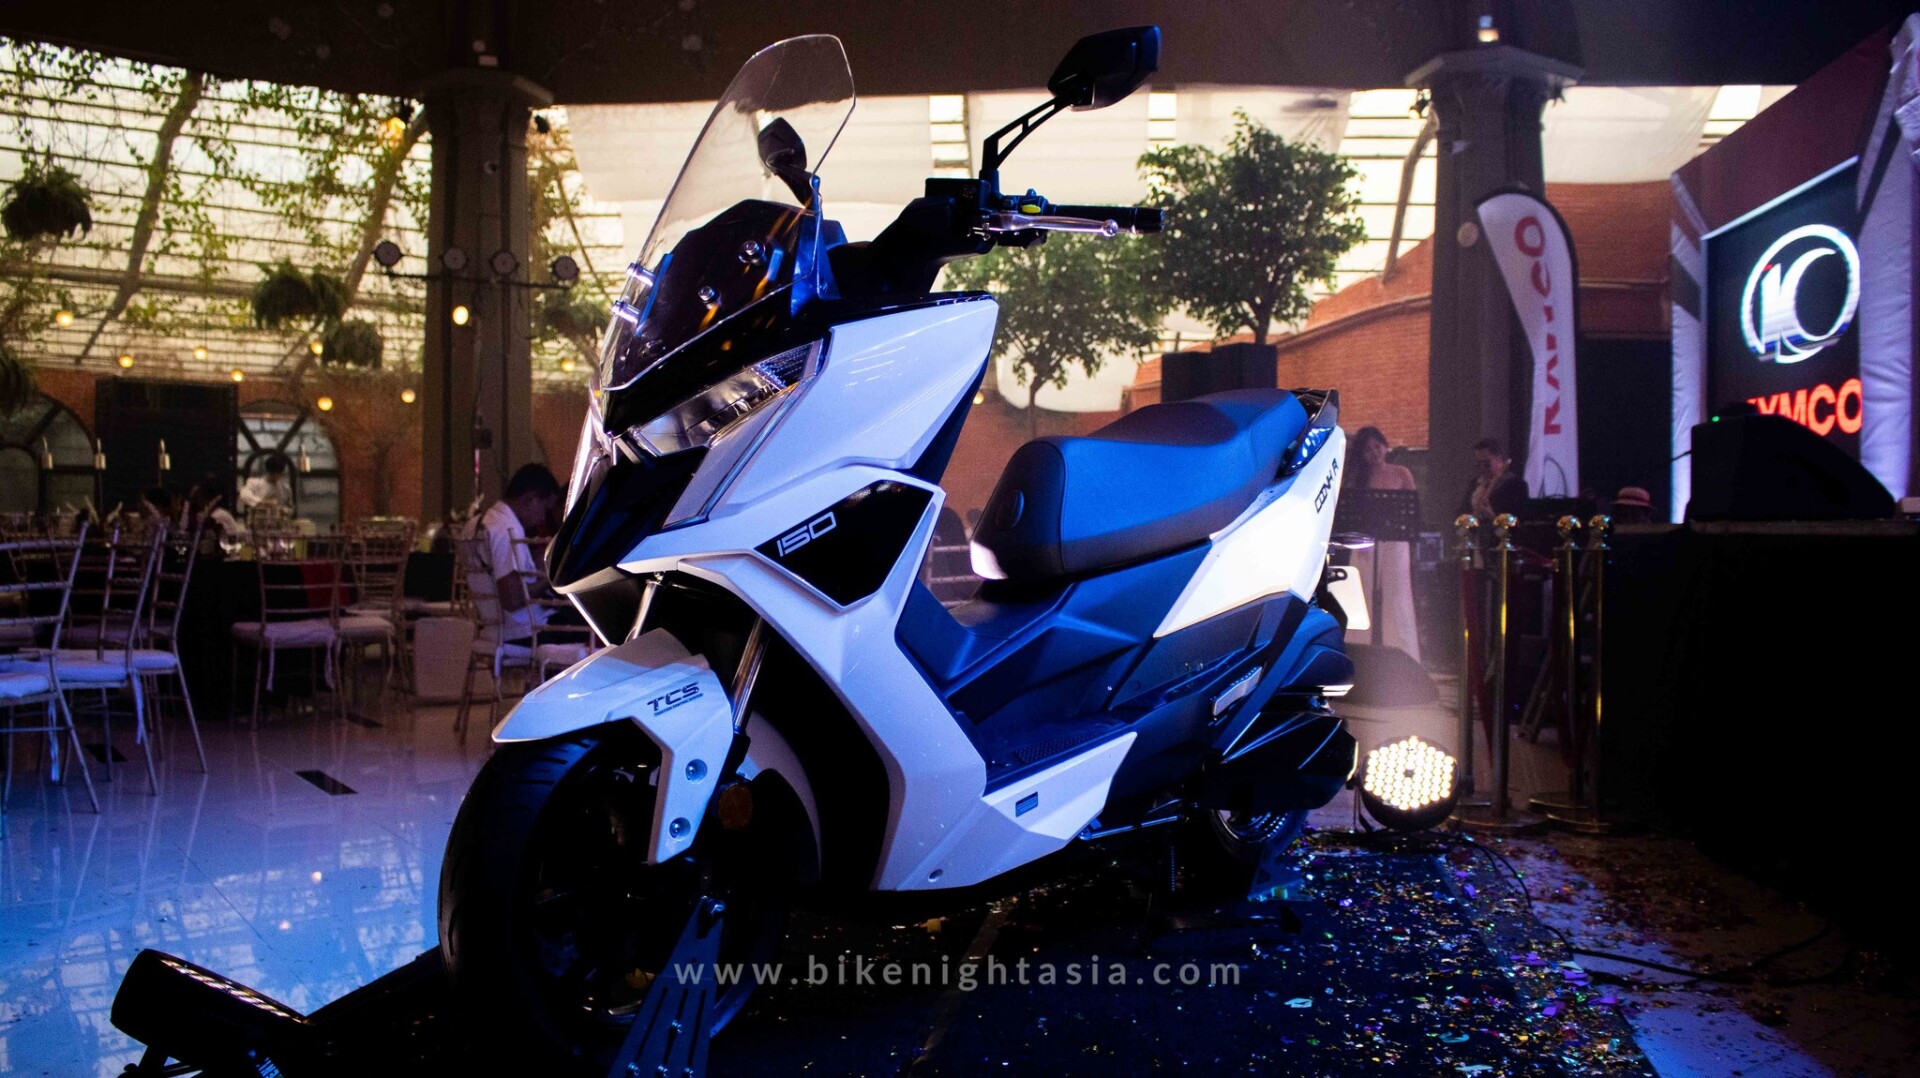 KYMCO DINK R 150 “Relive the Urban Adventure” the First Scooter with Maxitype Liquid Cooling System in its category